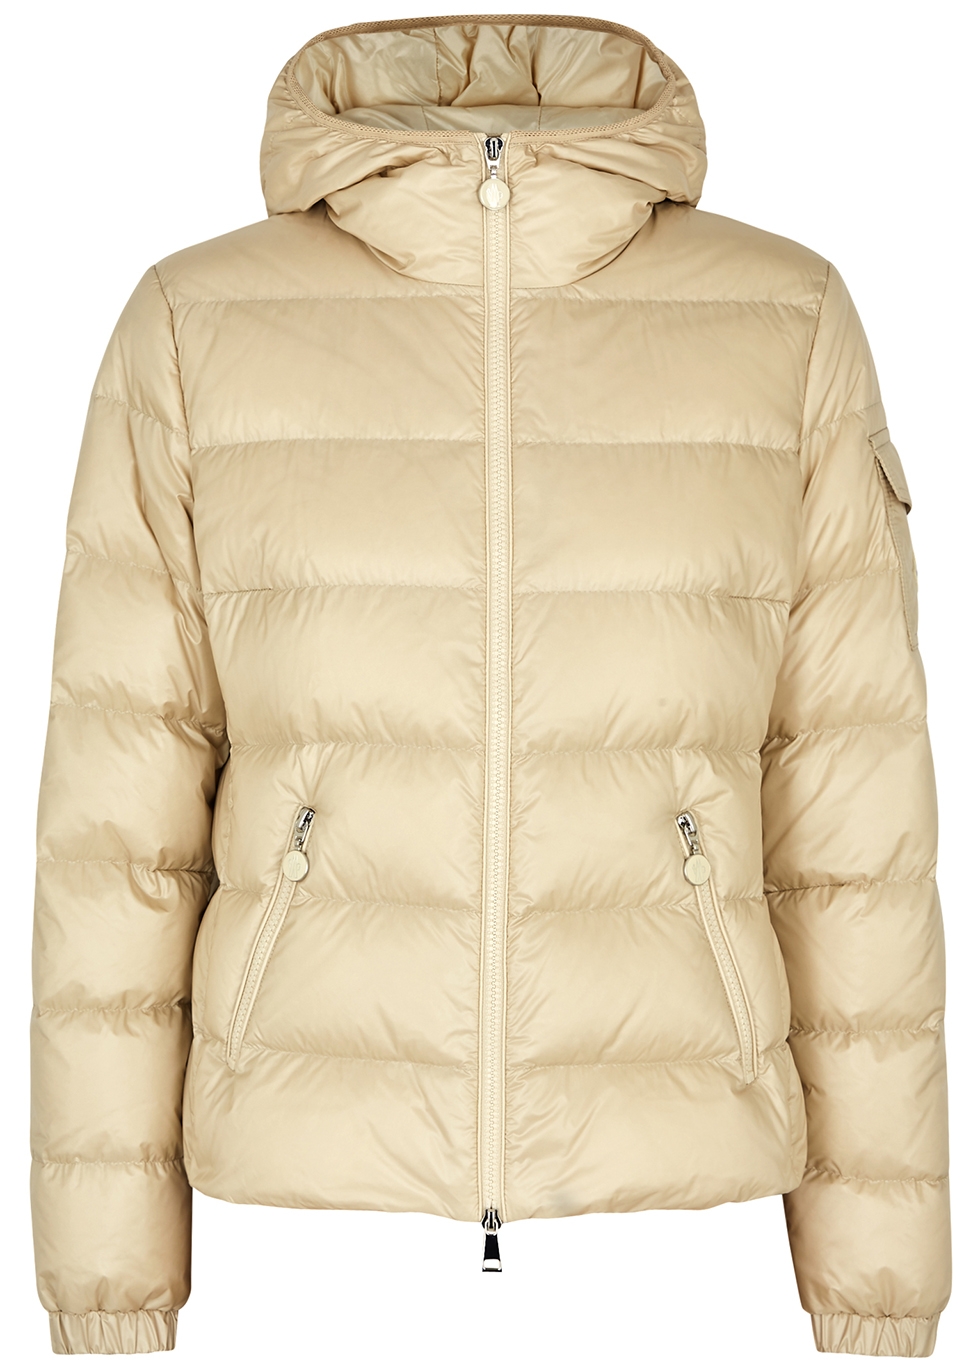 Moncler Gles hooded quilted shell jacket - Harvey Nichols